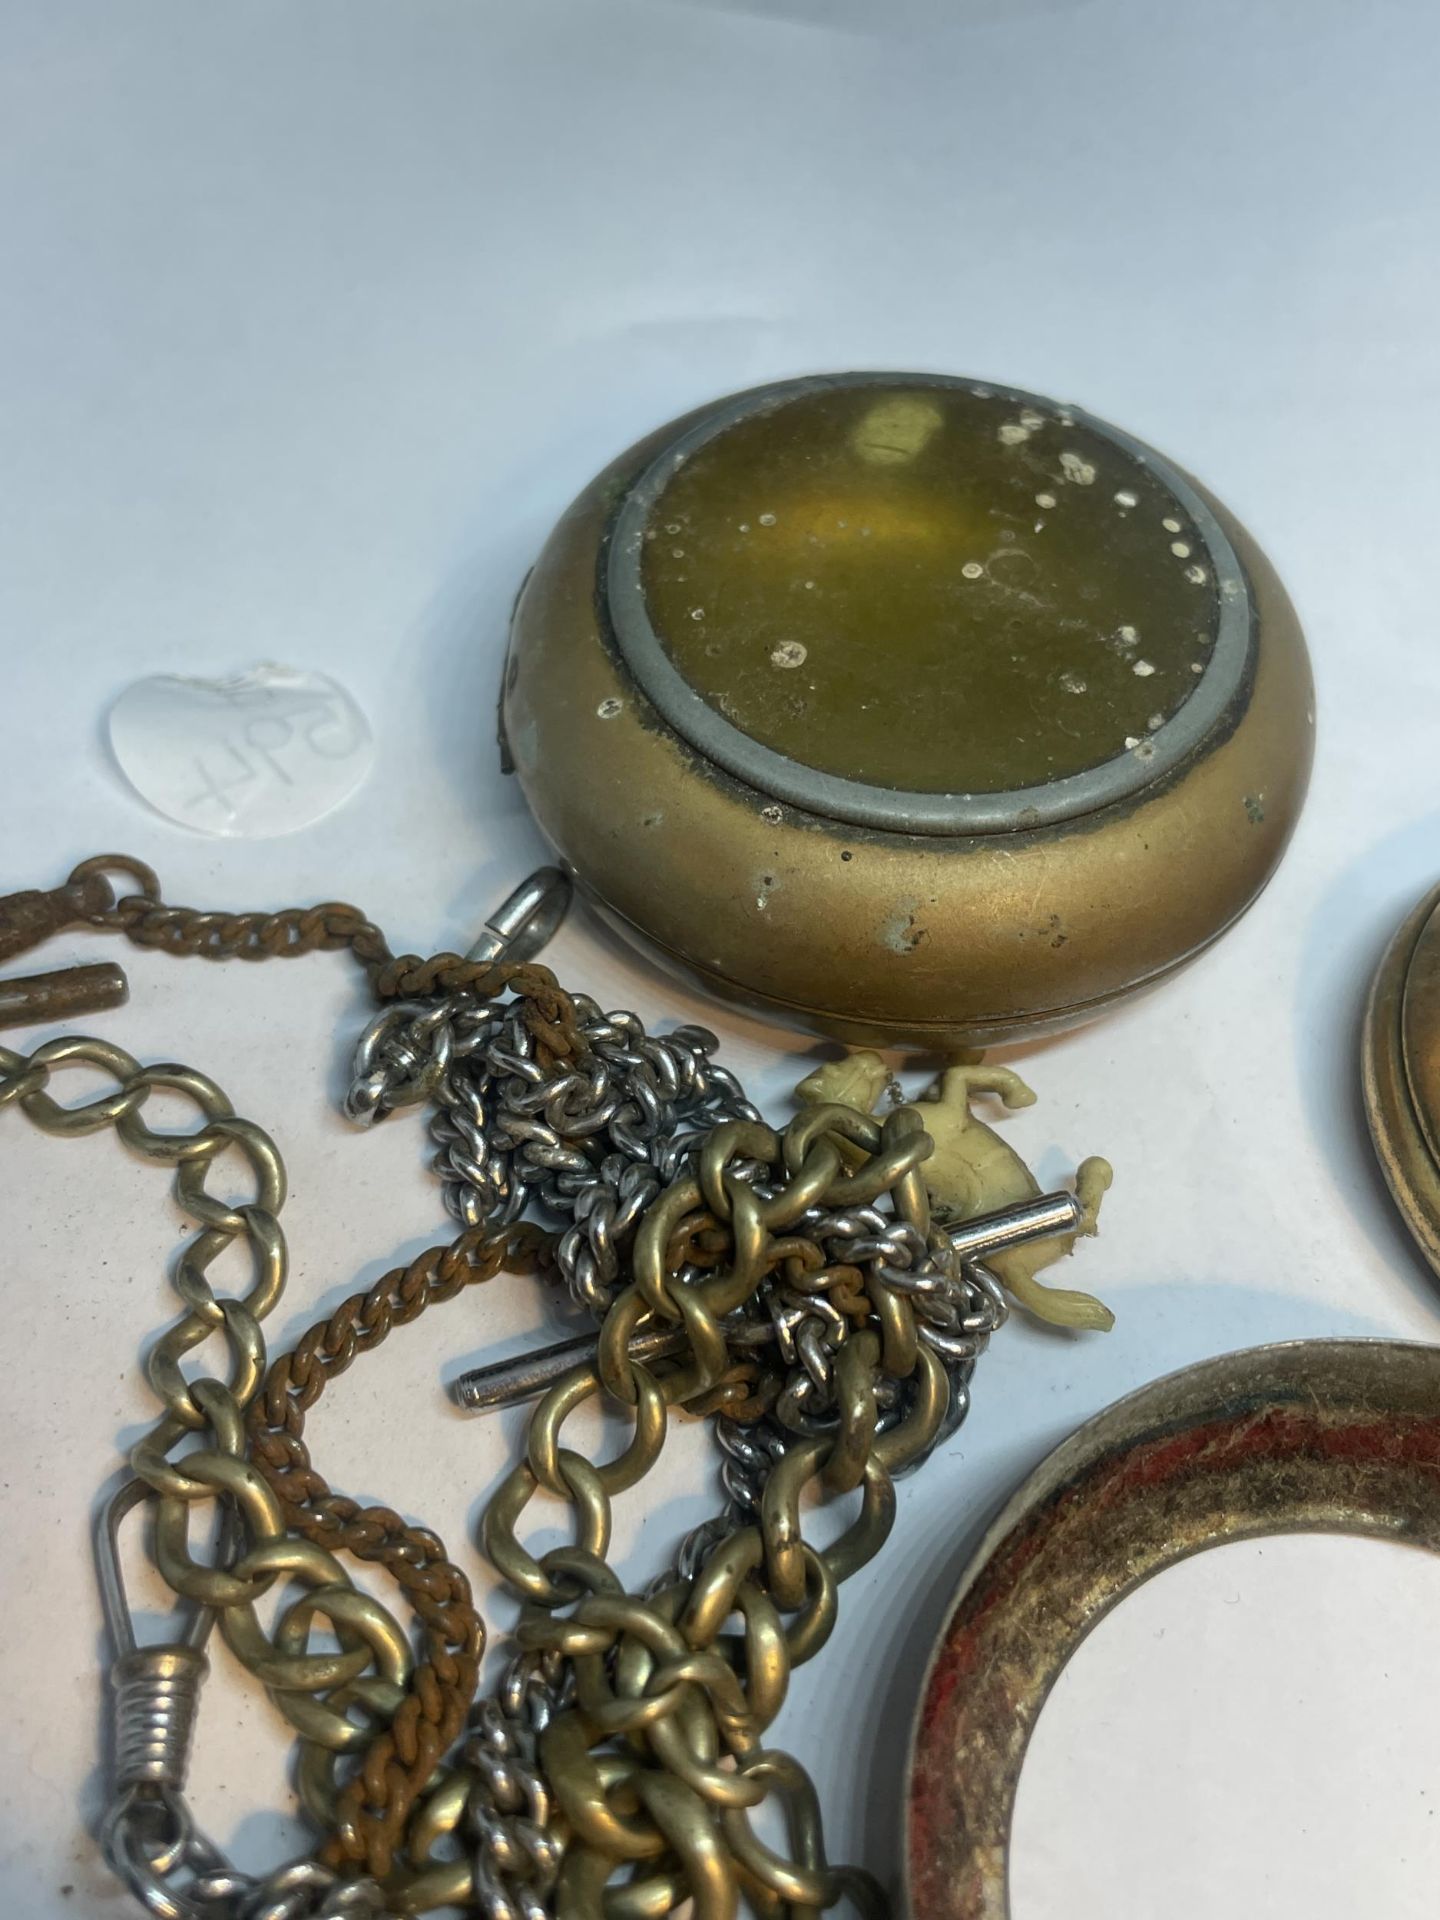 A SILVER POCKET WATCH AND VARIOUS PARTS TO INCLUDE KEYS AND CHAINS - Image 3 of 6